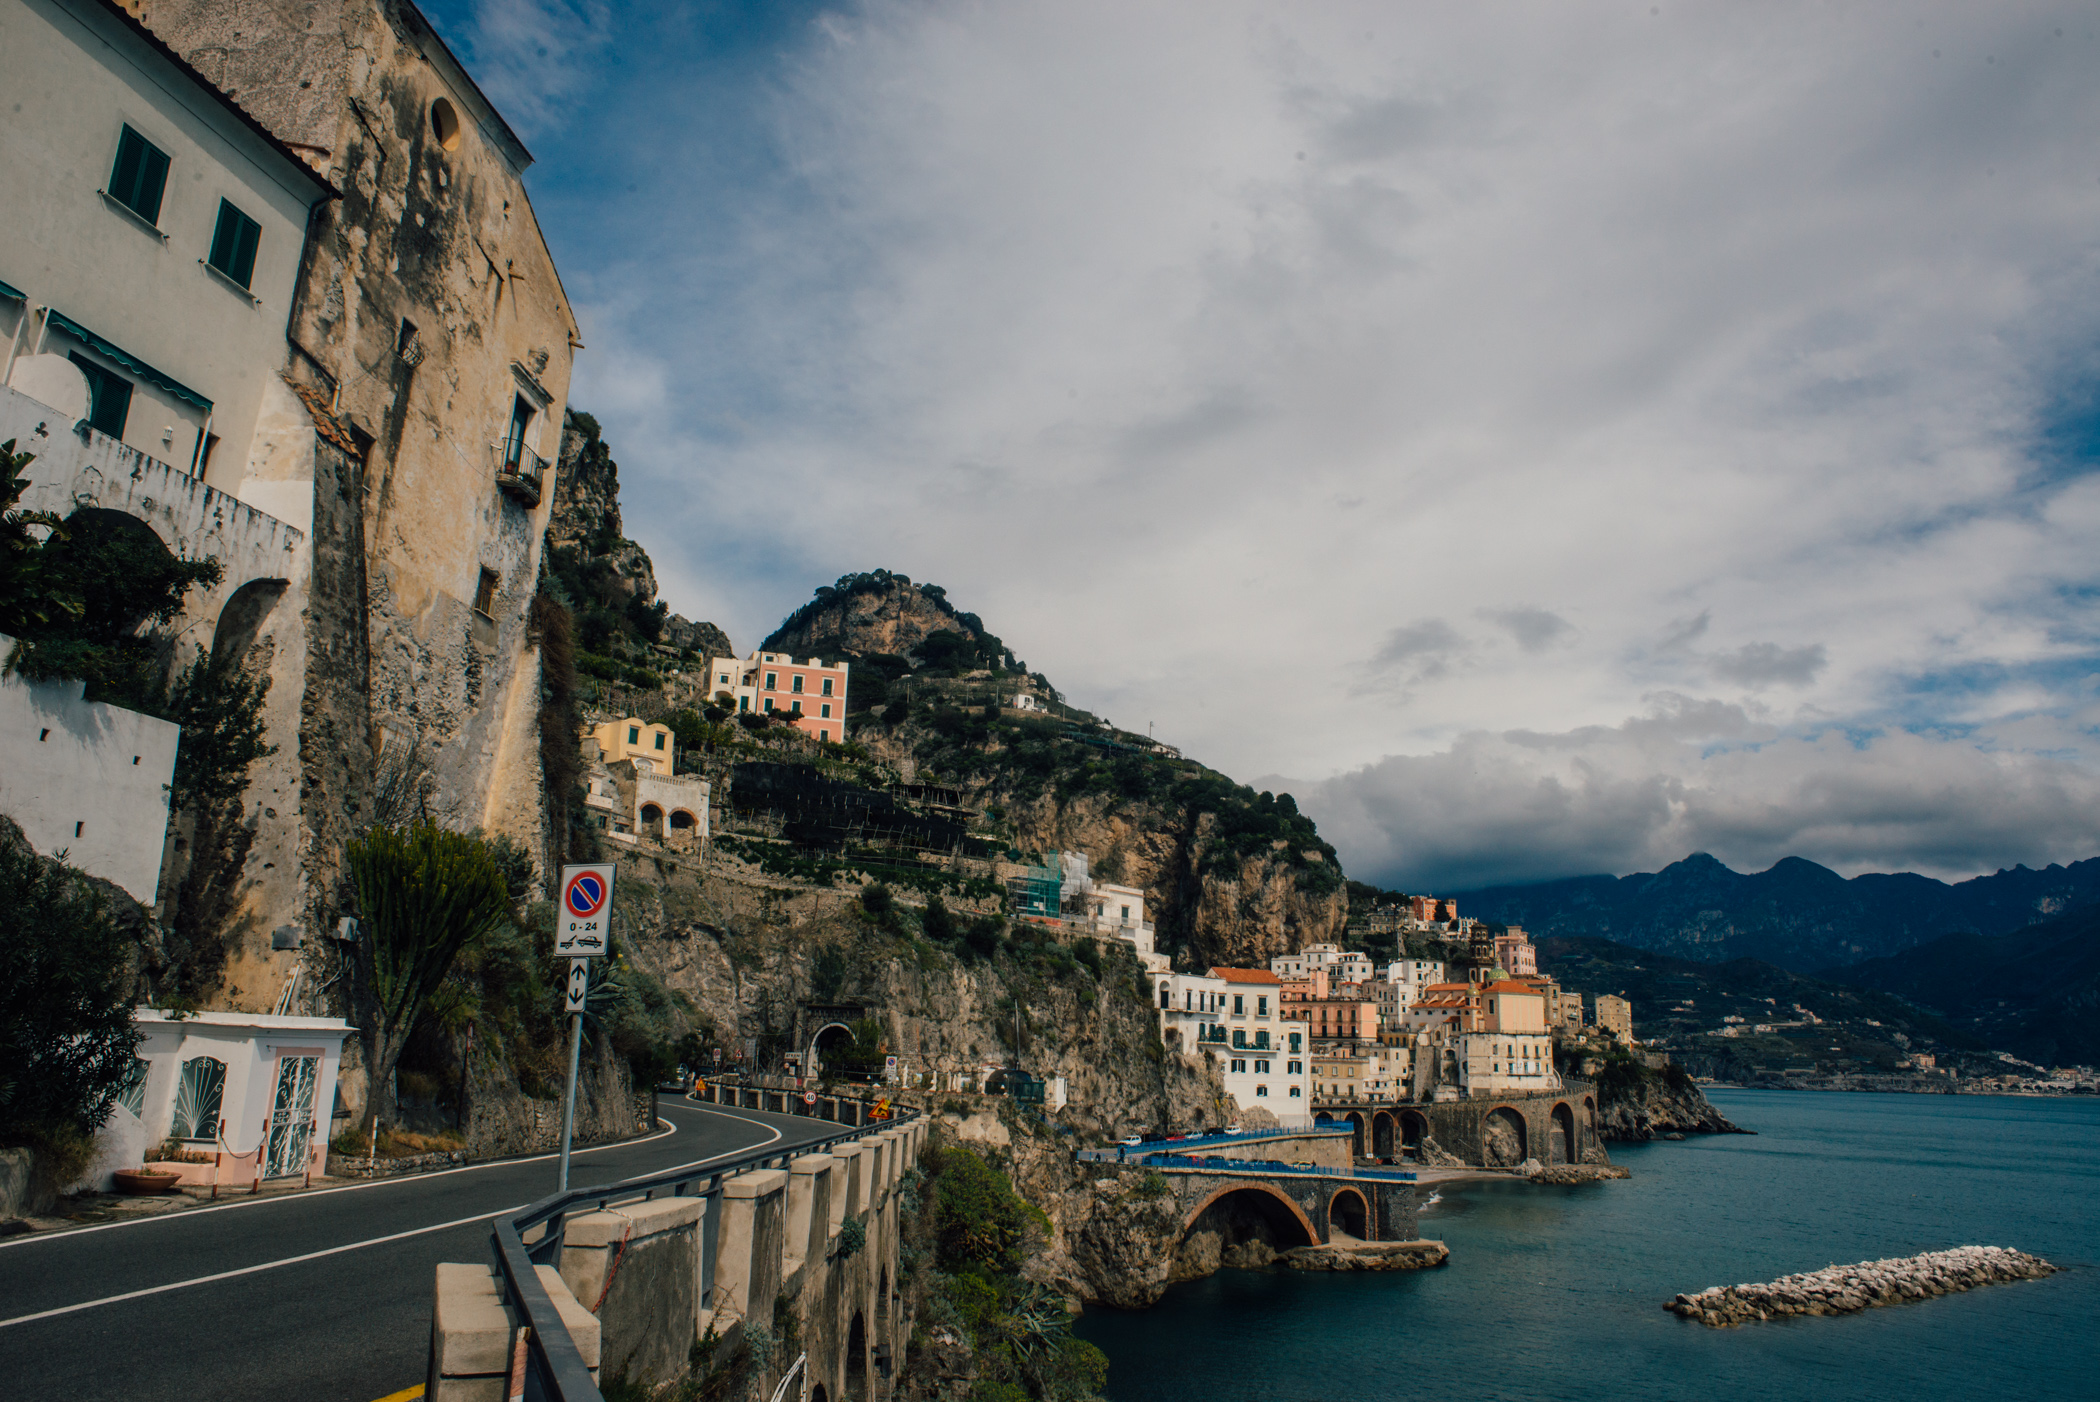 View of the city of Amalfi.